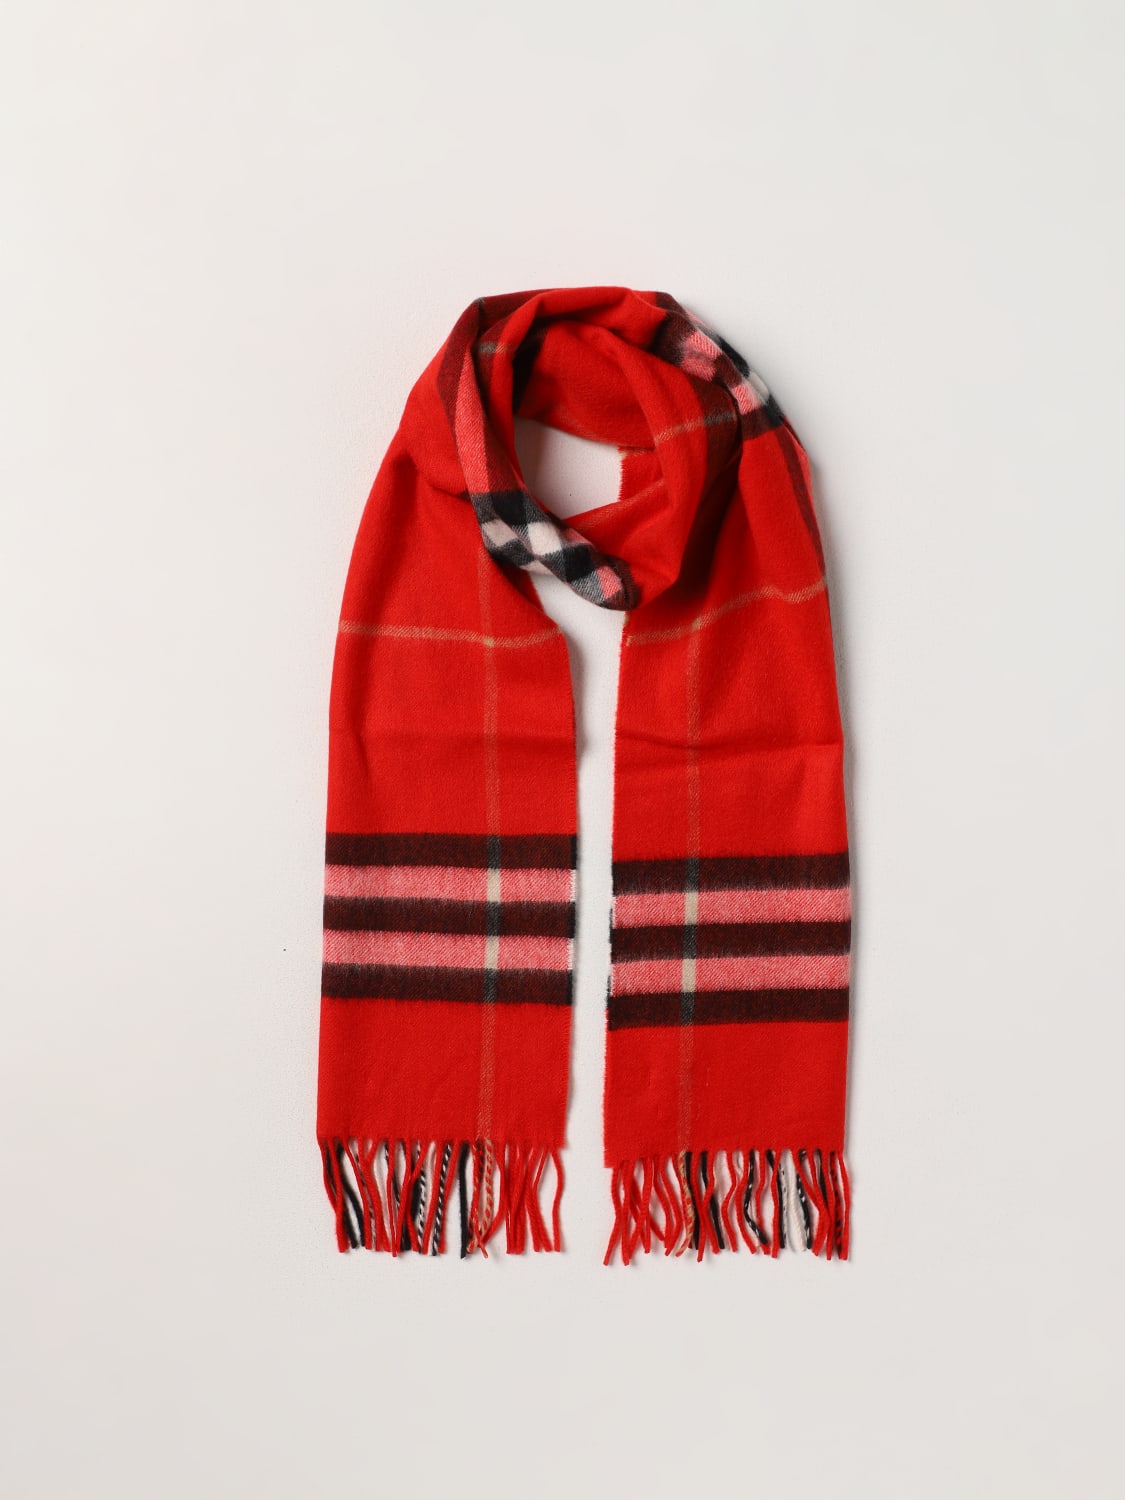 Burberry checked cashmere scarf - Red